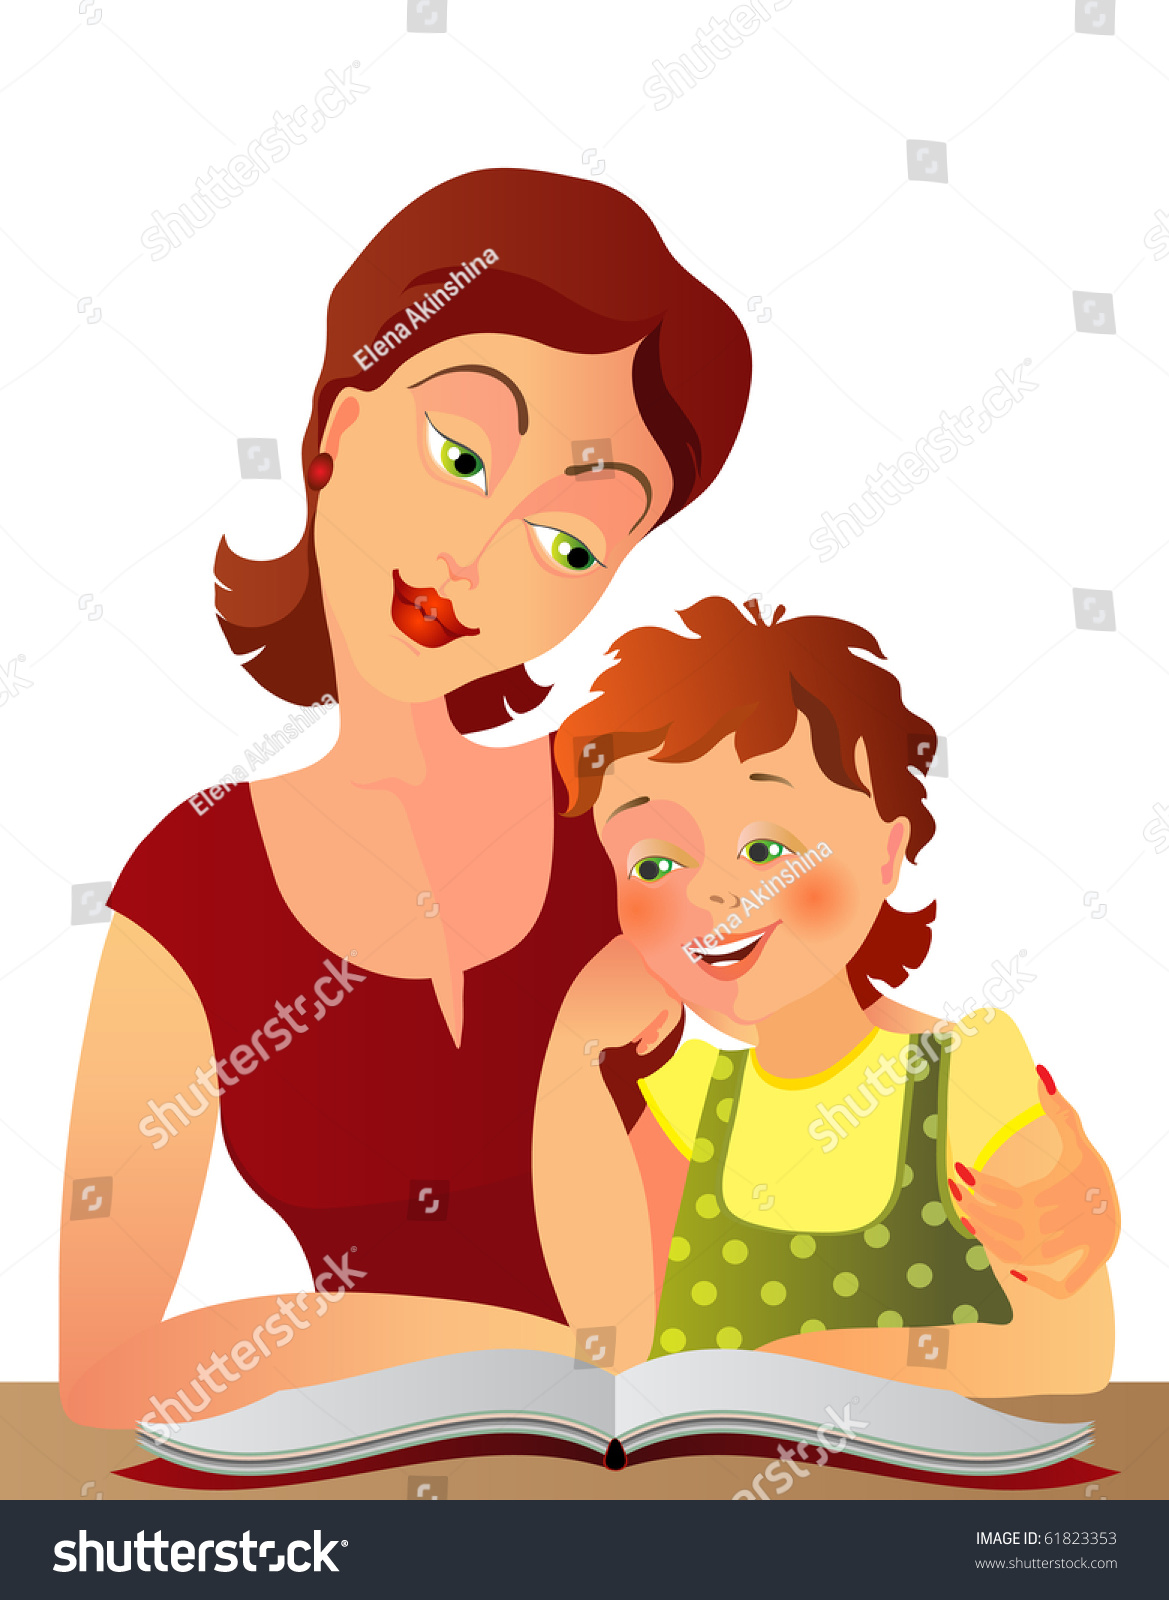 Mother And Daughter Stock Vector Illustration 61823353 : Shutterstock